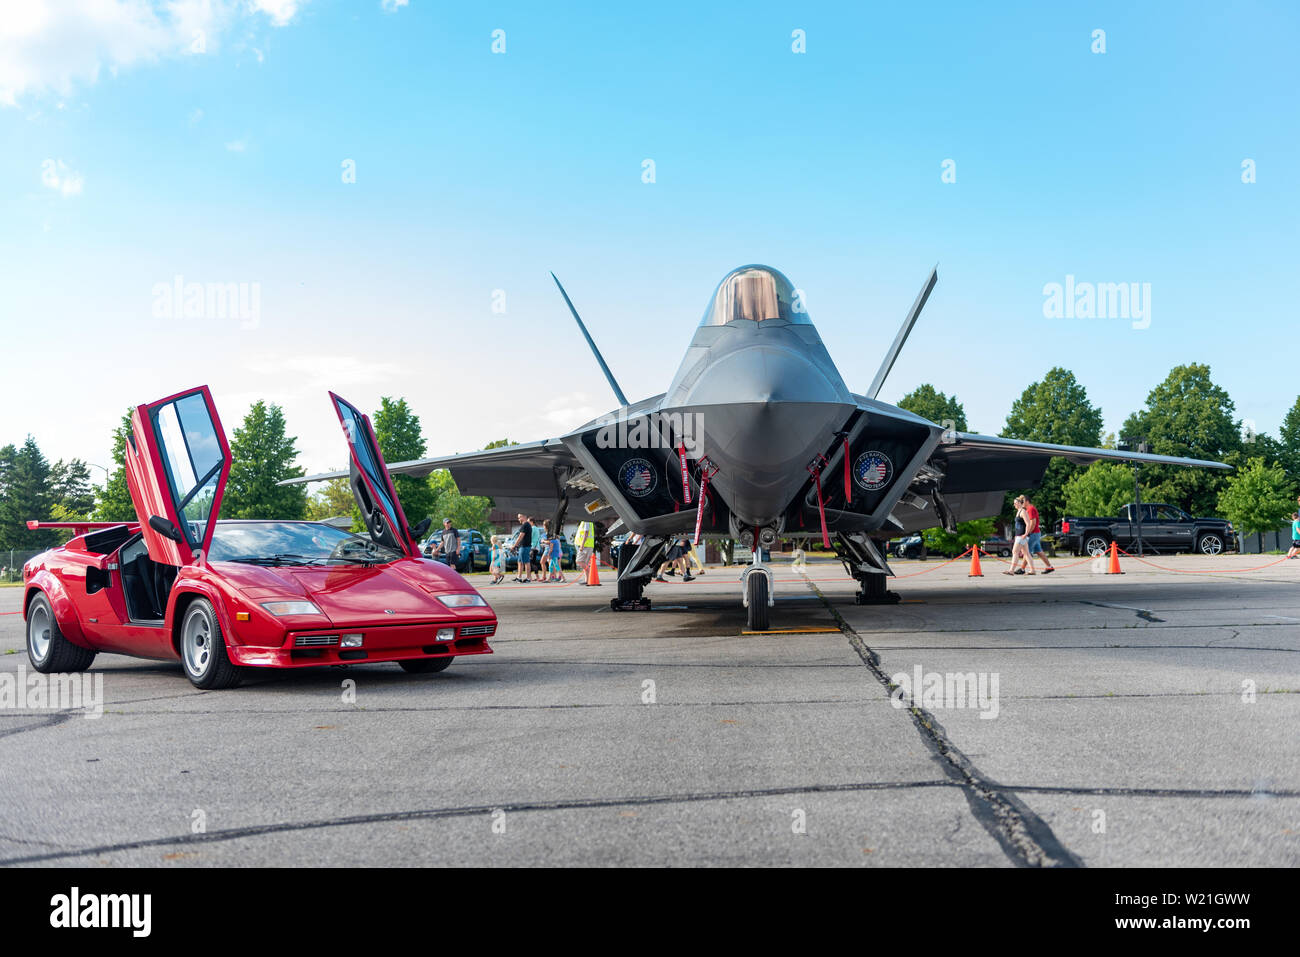 A Lamborghini Countach sits next to an F-22 Raptor during the National Cherry Festival Open House in Traverse City, Mich. June 29, 2019. Representing the U.S. Air Force and Air Combat Command, the F-22 Demo Team travels to 25 air shows a season to showcase the performance and capabilities of the world's premier 5th-generation fighter. (U.S. Air Force photo by 2nd Lt. Samuel Eckholm) Stock Photo